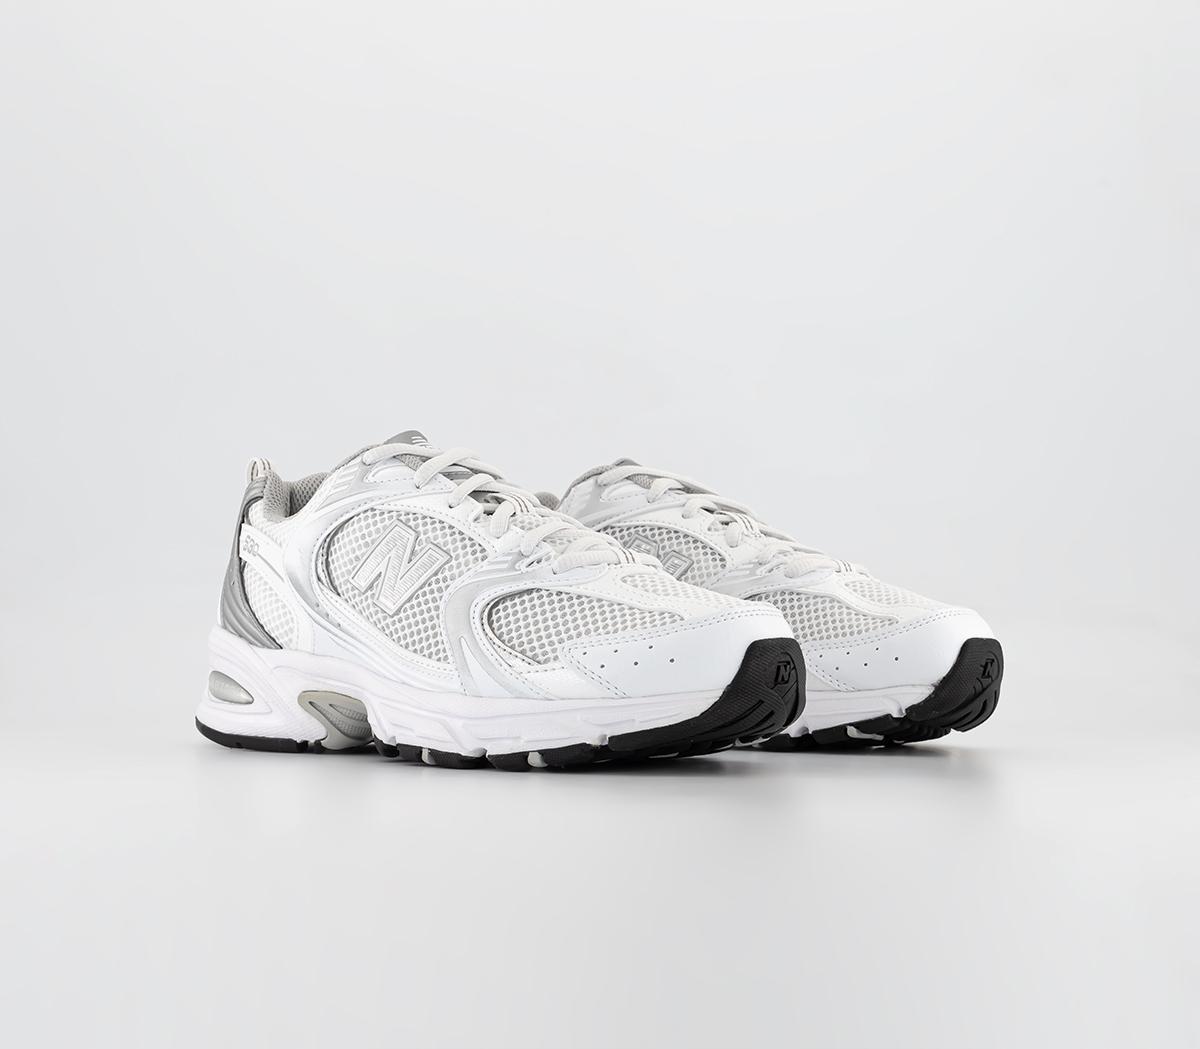 New Balance Womens Mr530 Trainers White Silver, 8